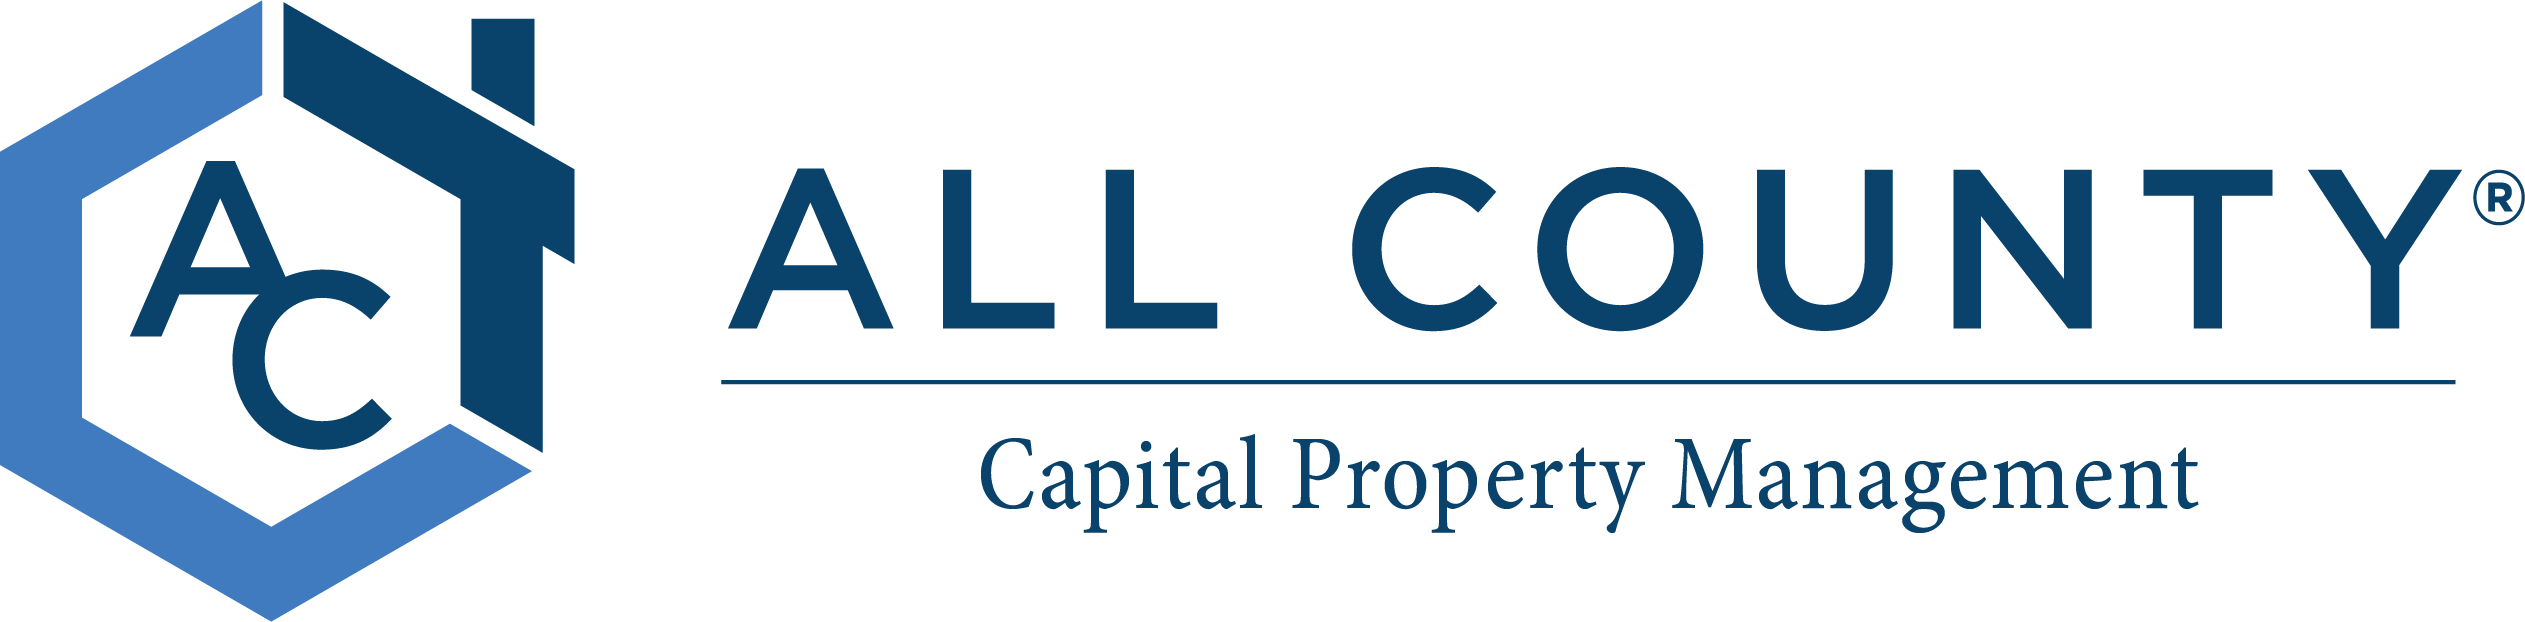 All County® Capital Property Management